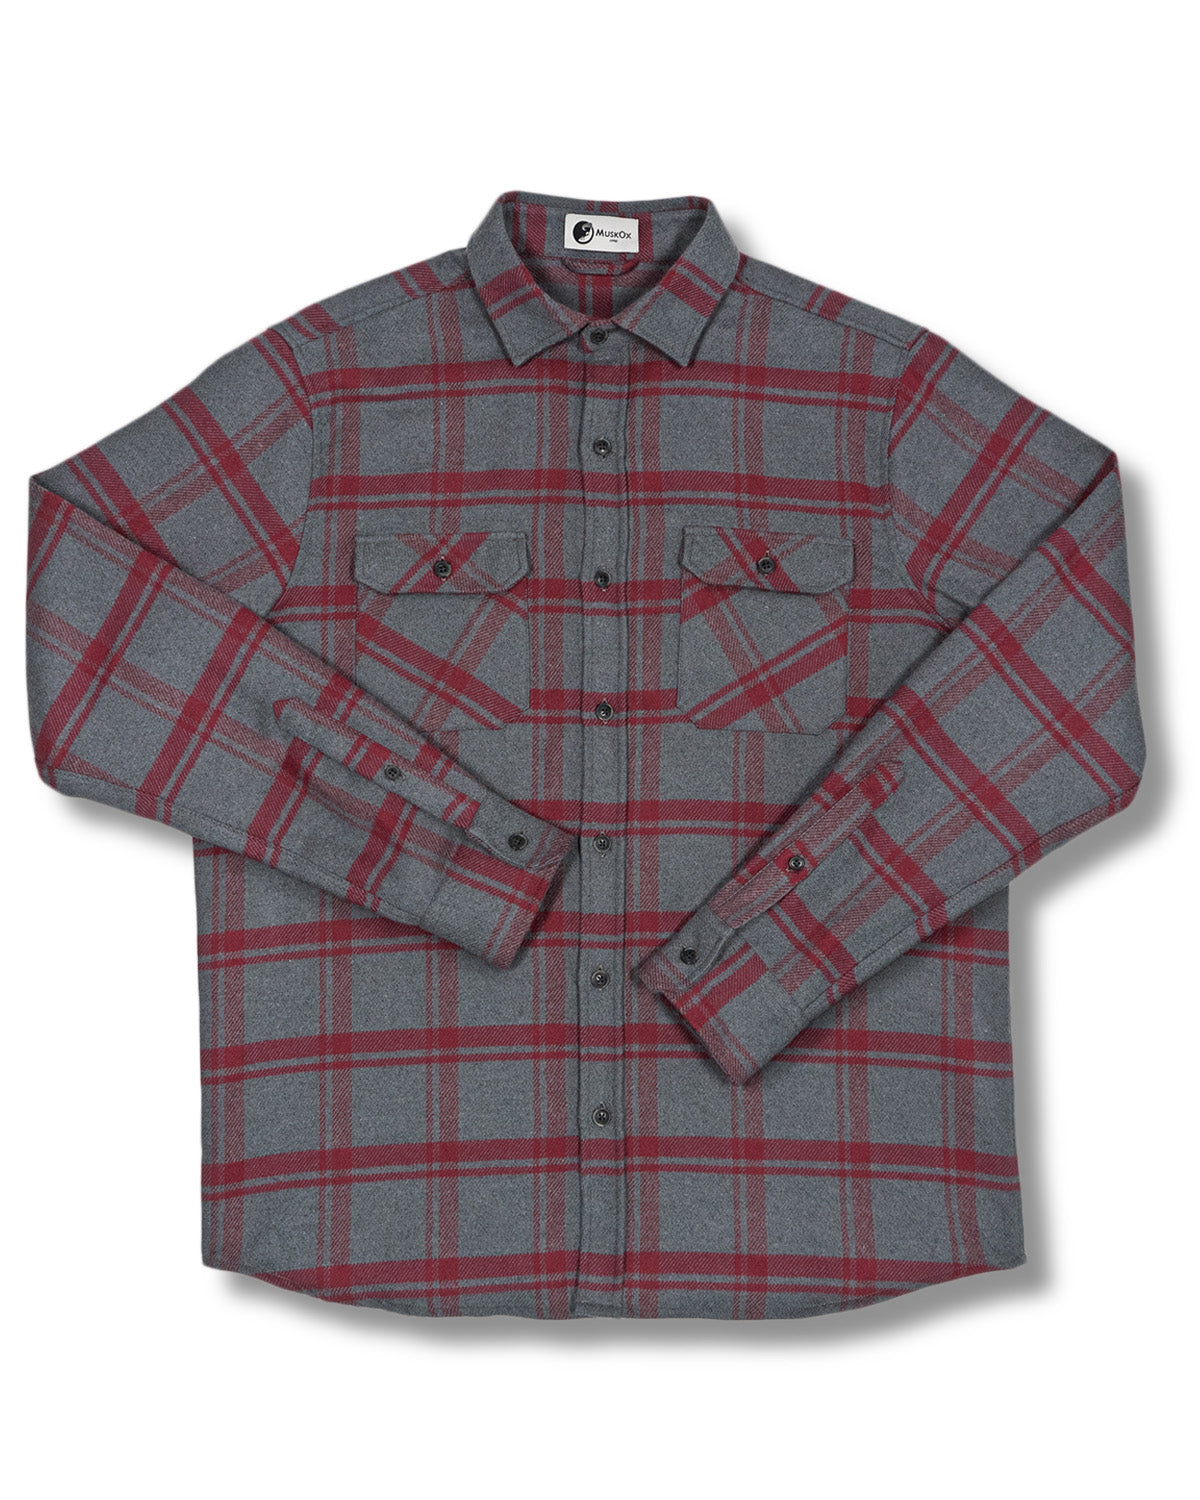 Field Grand Flannel in Plaid, Heavyweight Flannel Shirt for Men